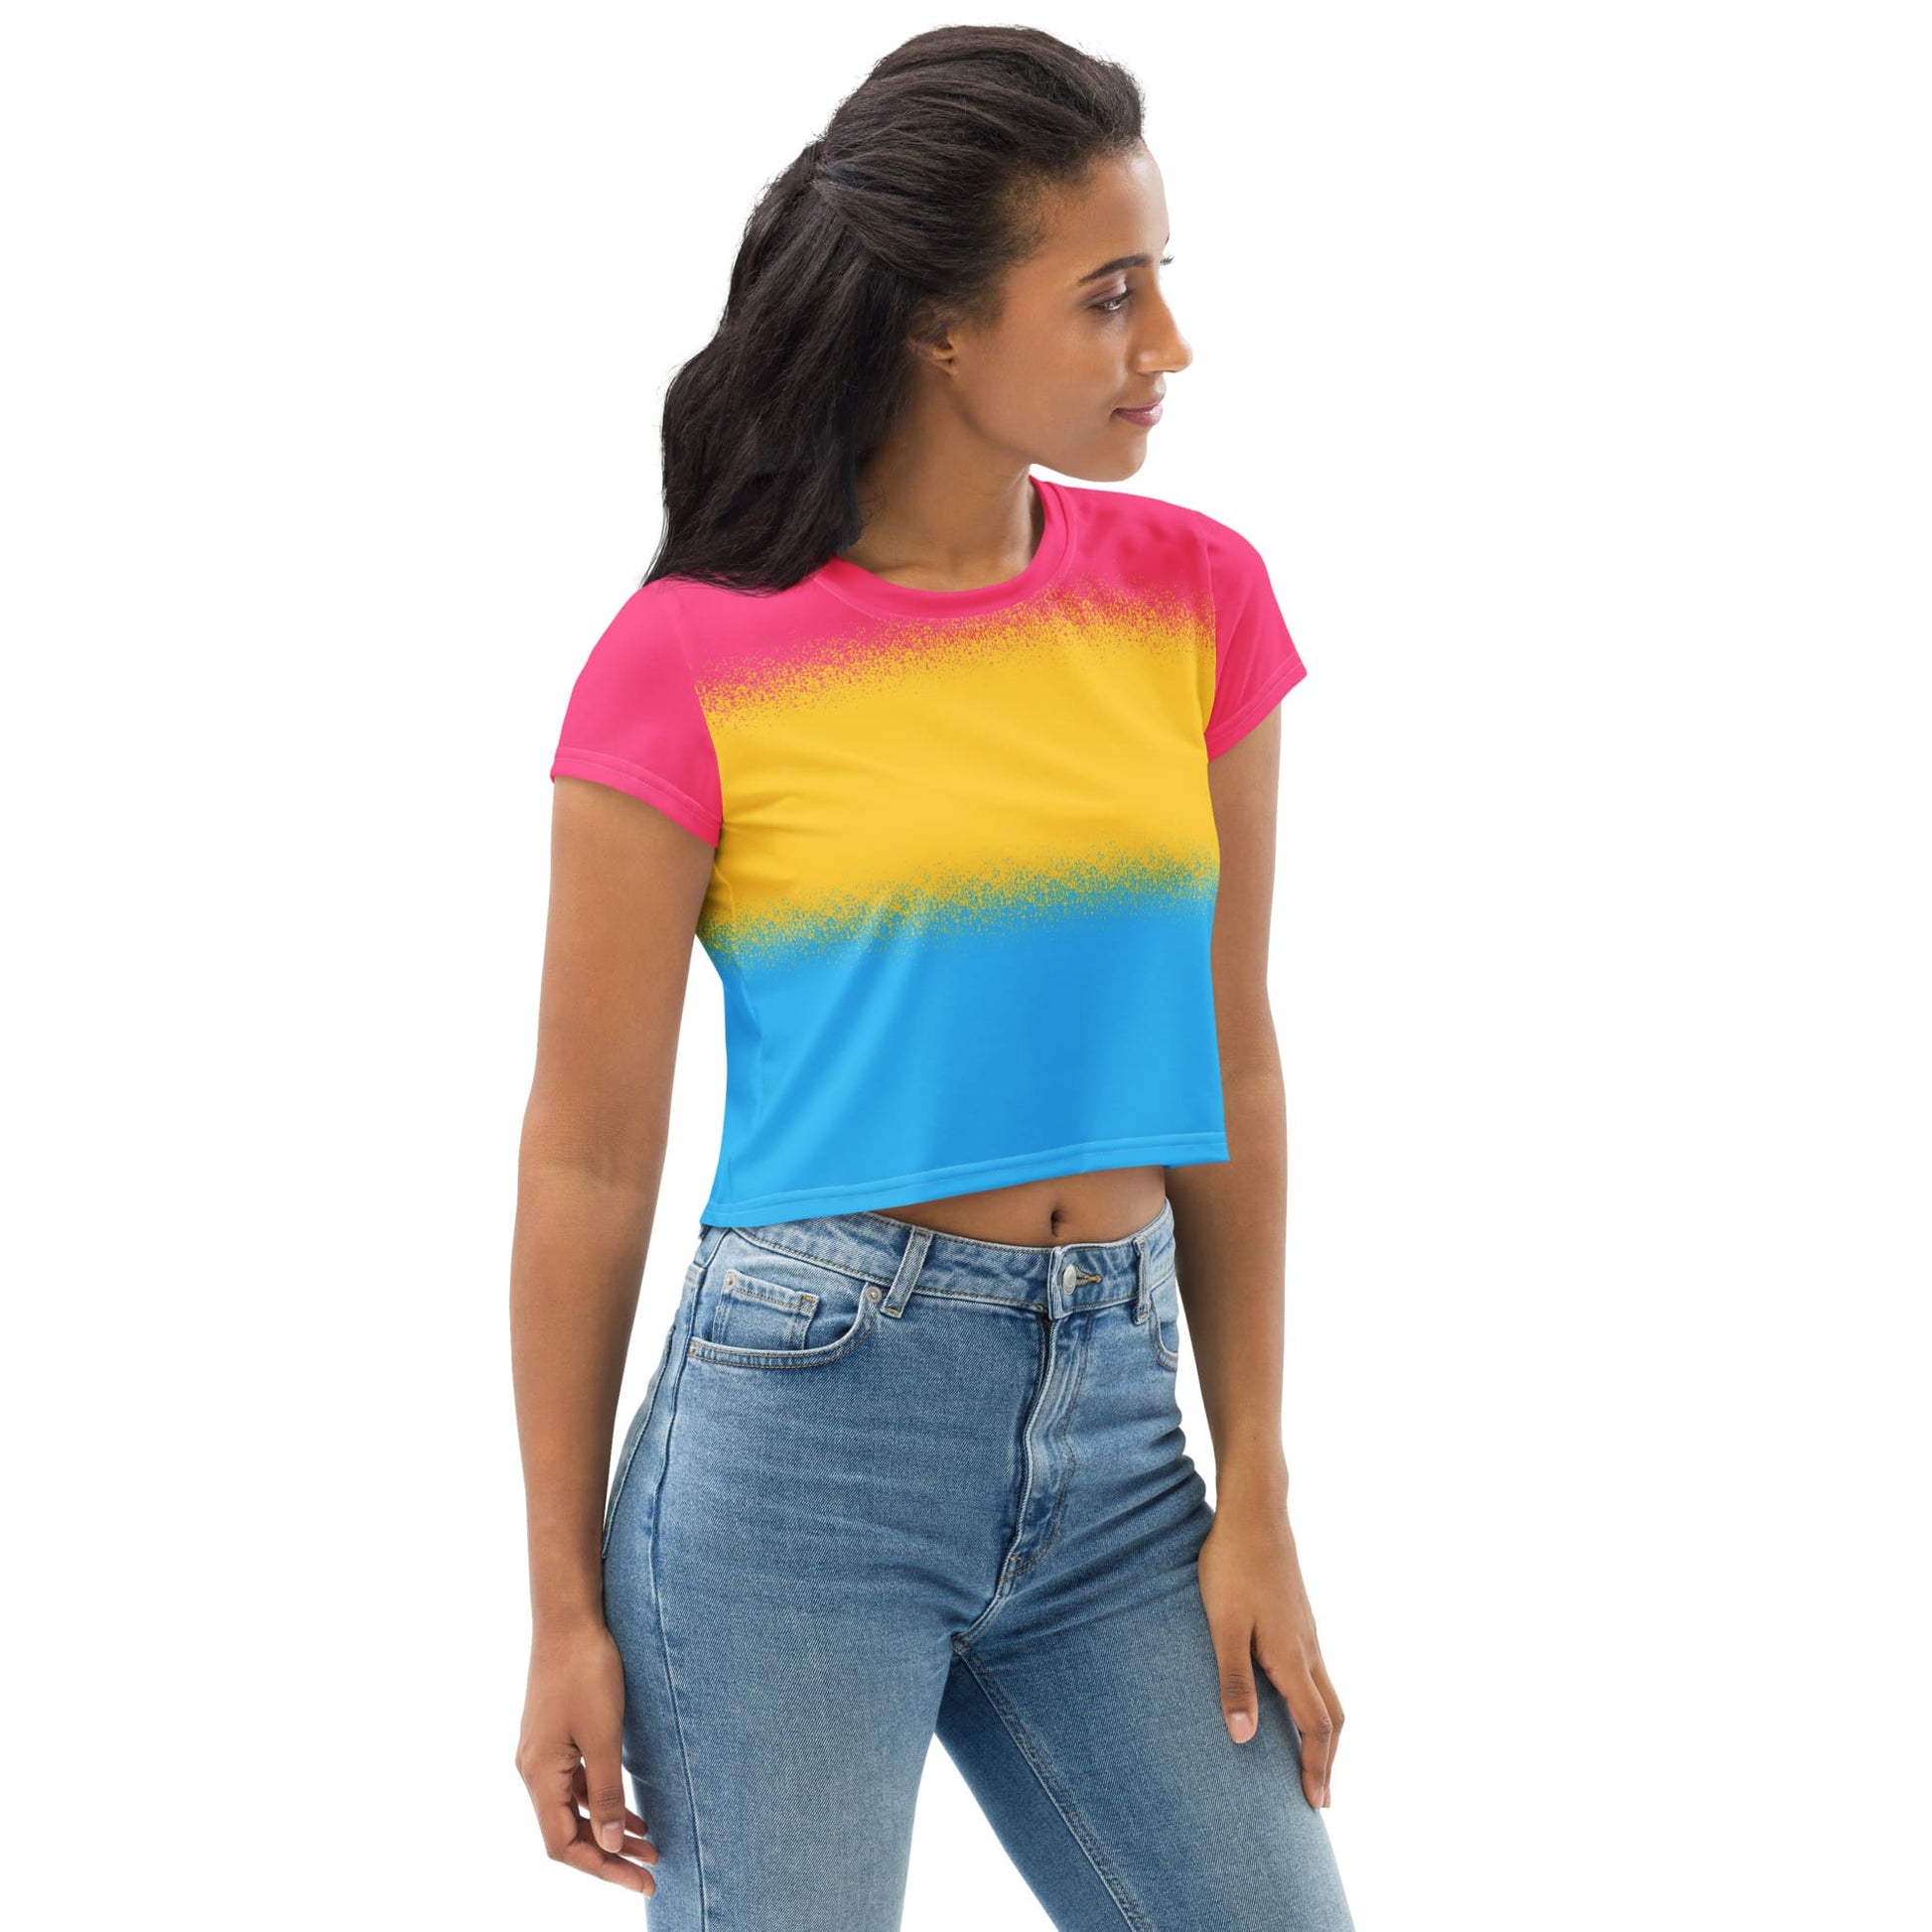 pansexual crop top, pan pride cropped shirt with wings on back, left